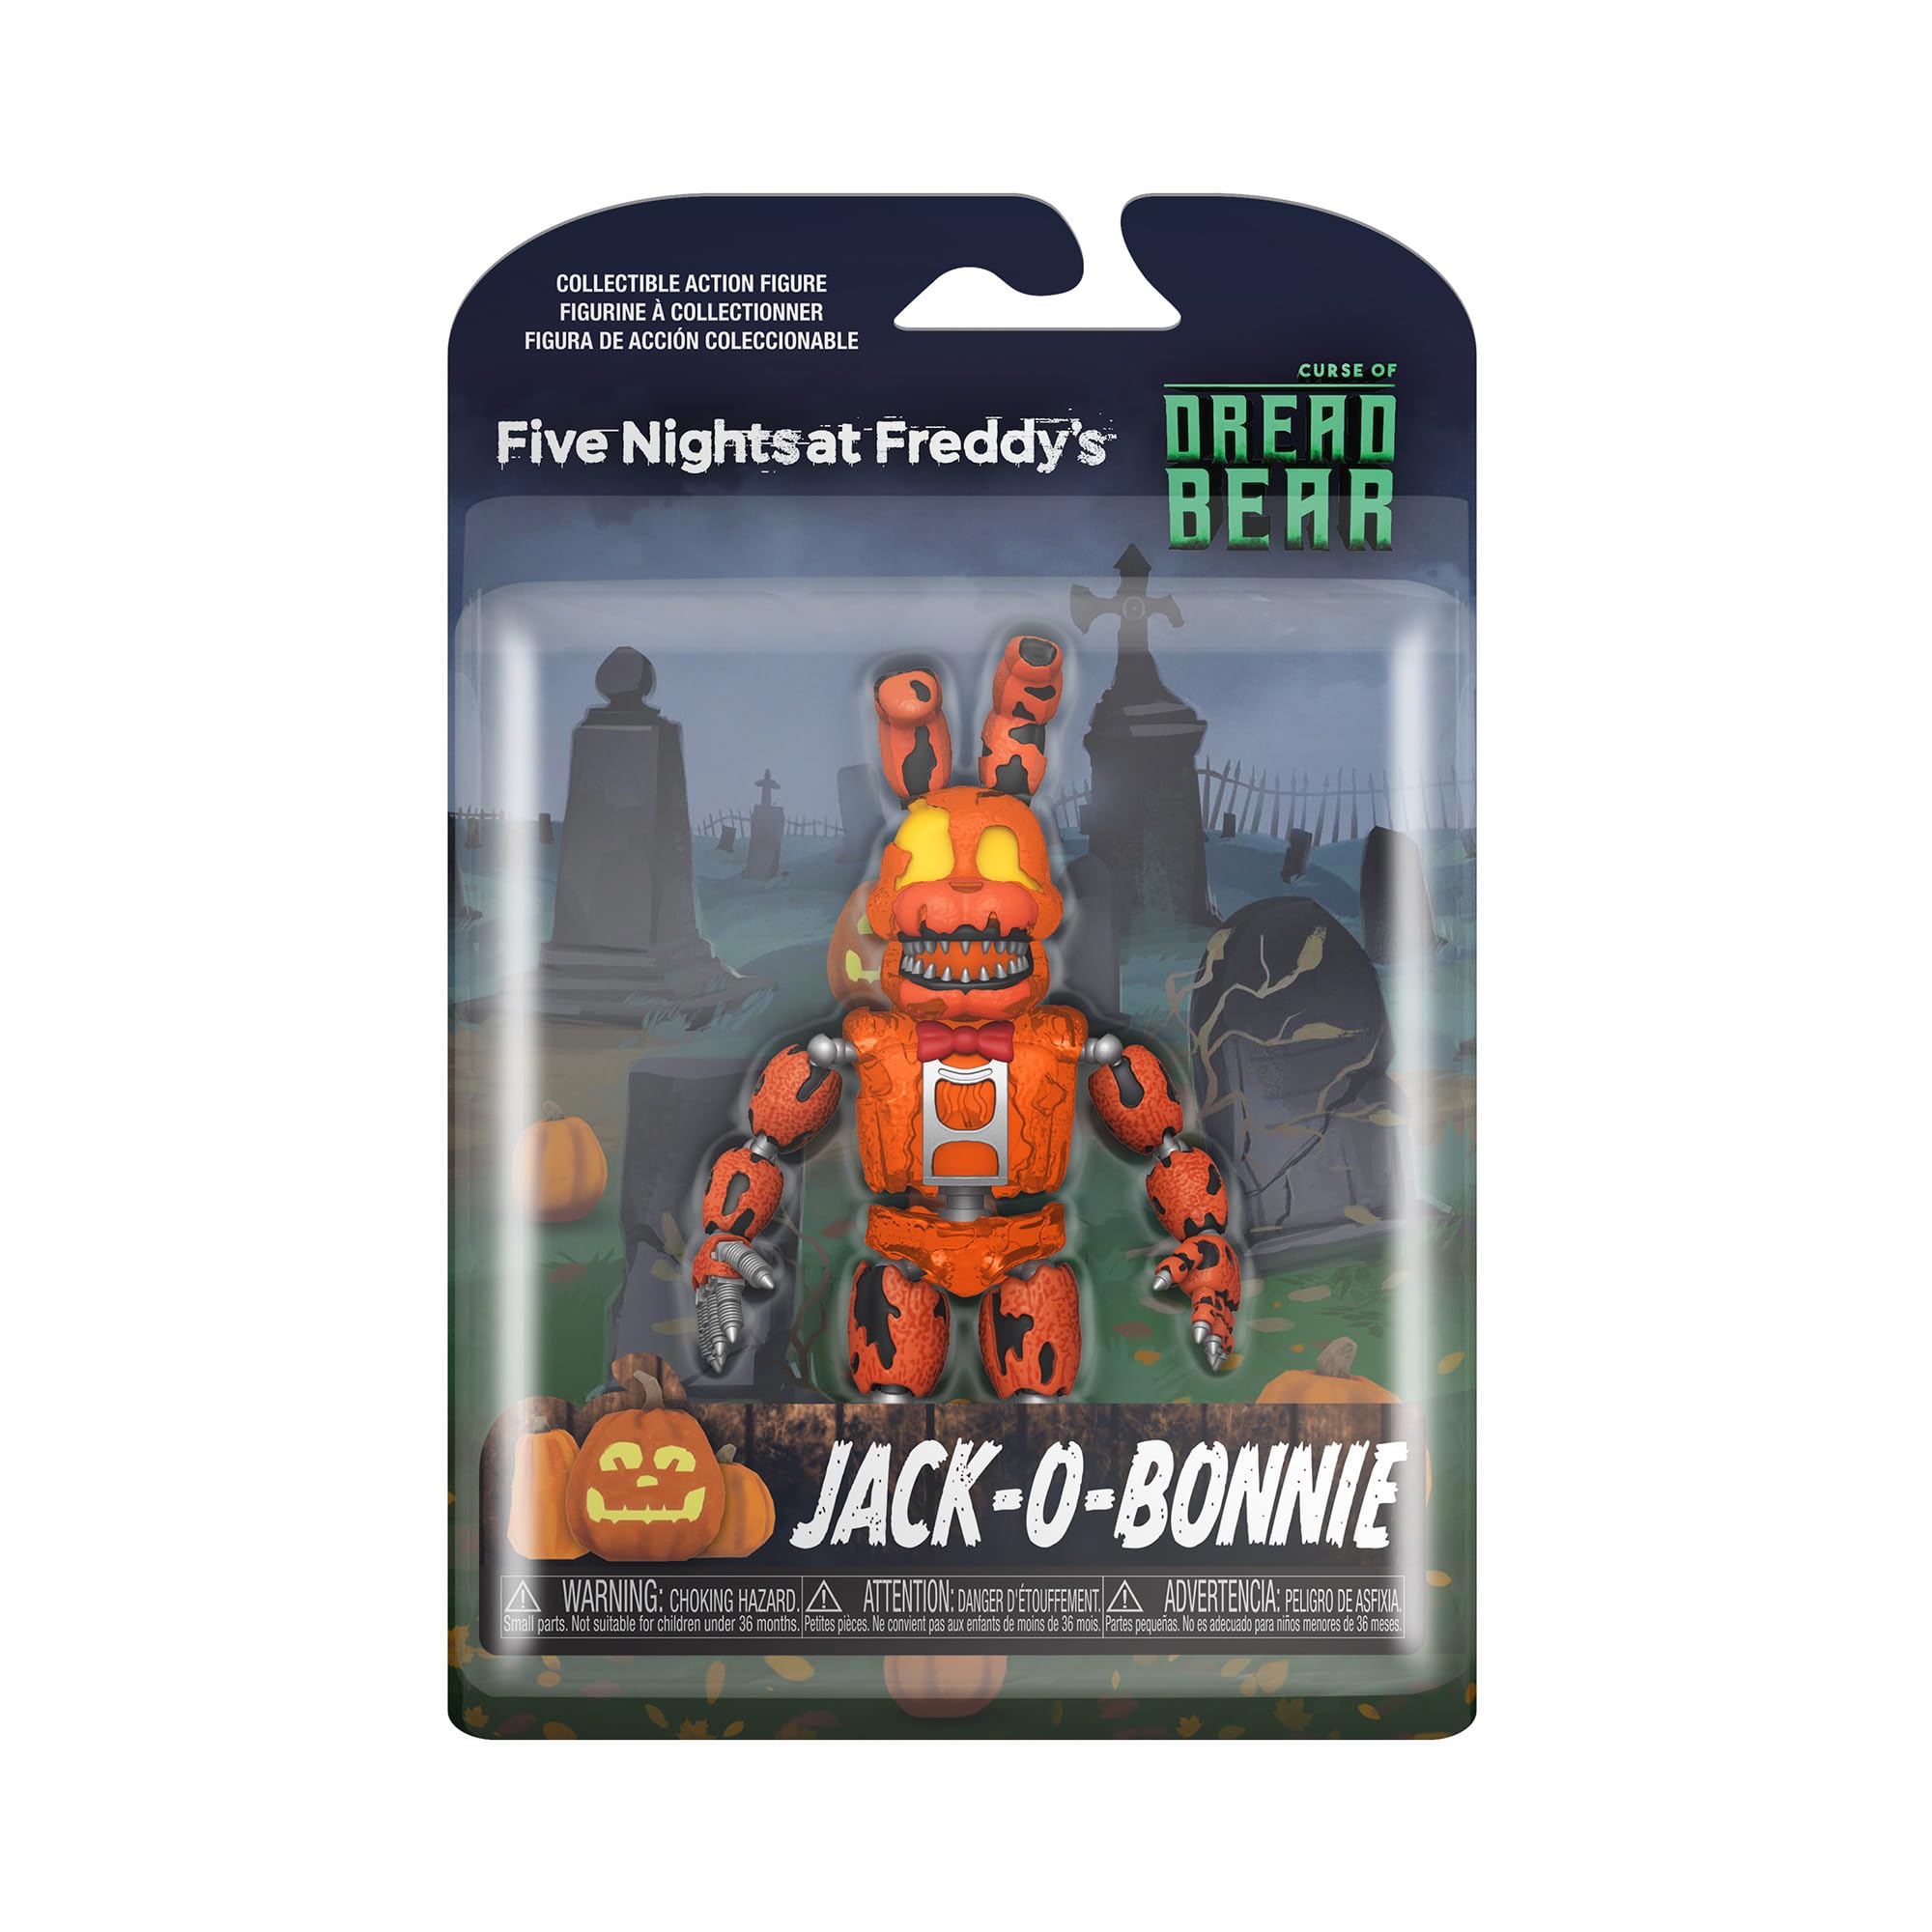 Funko Action Figure: Five Nights at Freddy's (FNAF) Dreadbear - Jack-O-Bonnie - Jack-o-Bonnie - Collectible - Gift Idea - Official Merchandise - for Boys, Girls, Kids & Adults - Video Games Fans